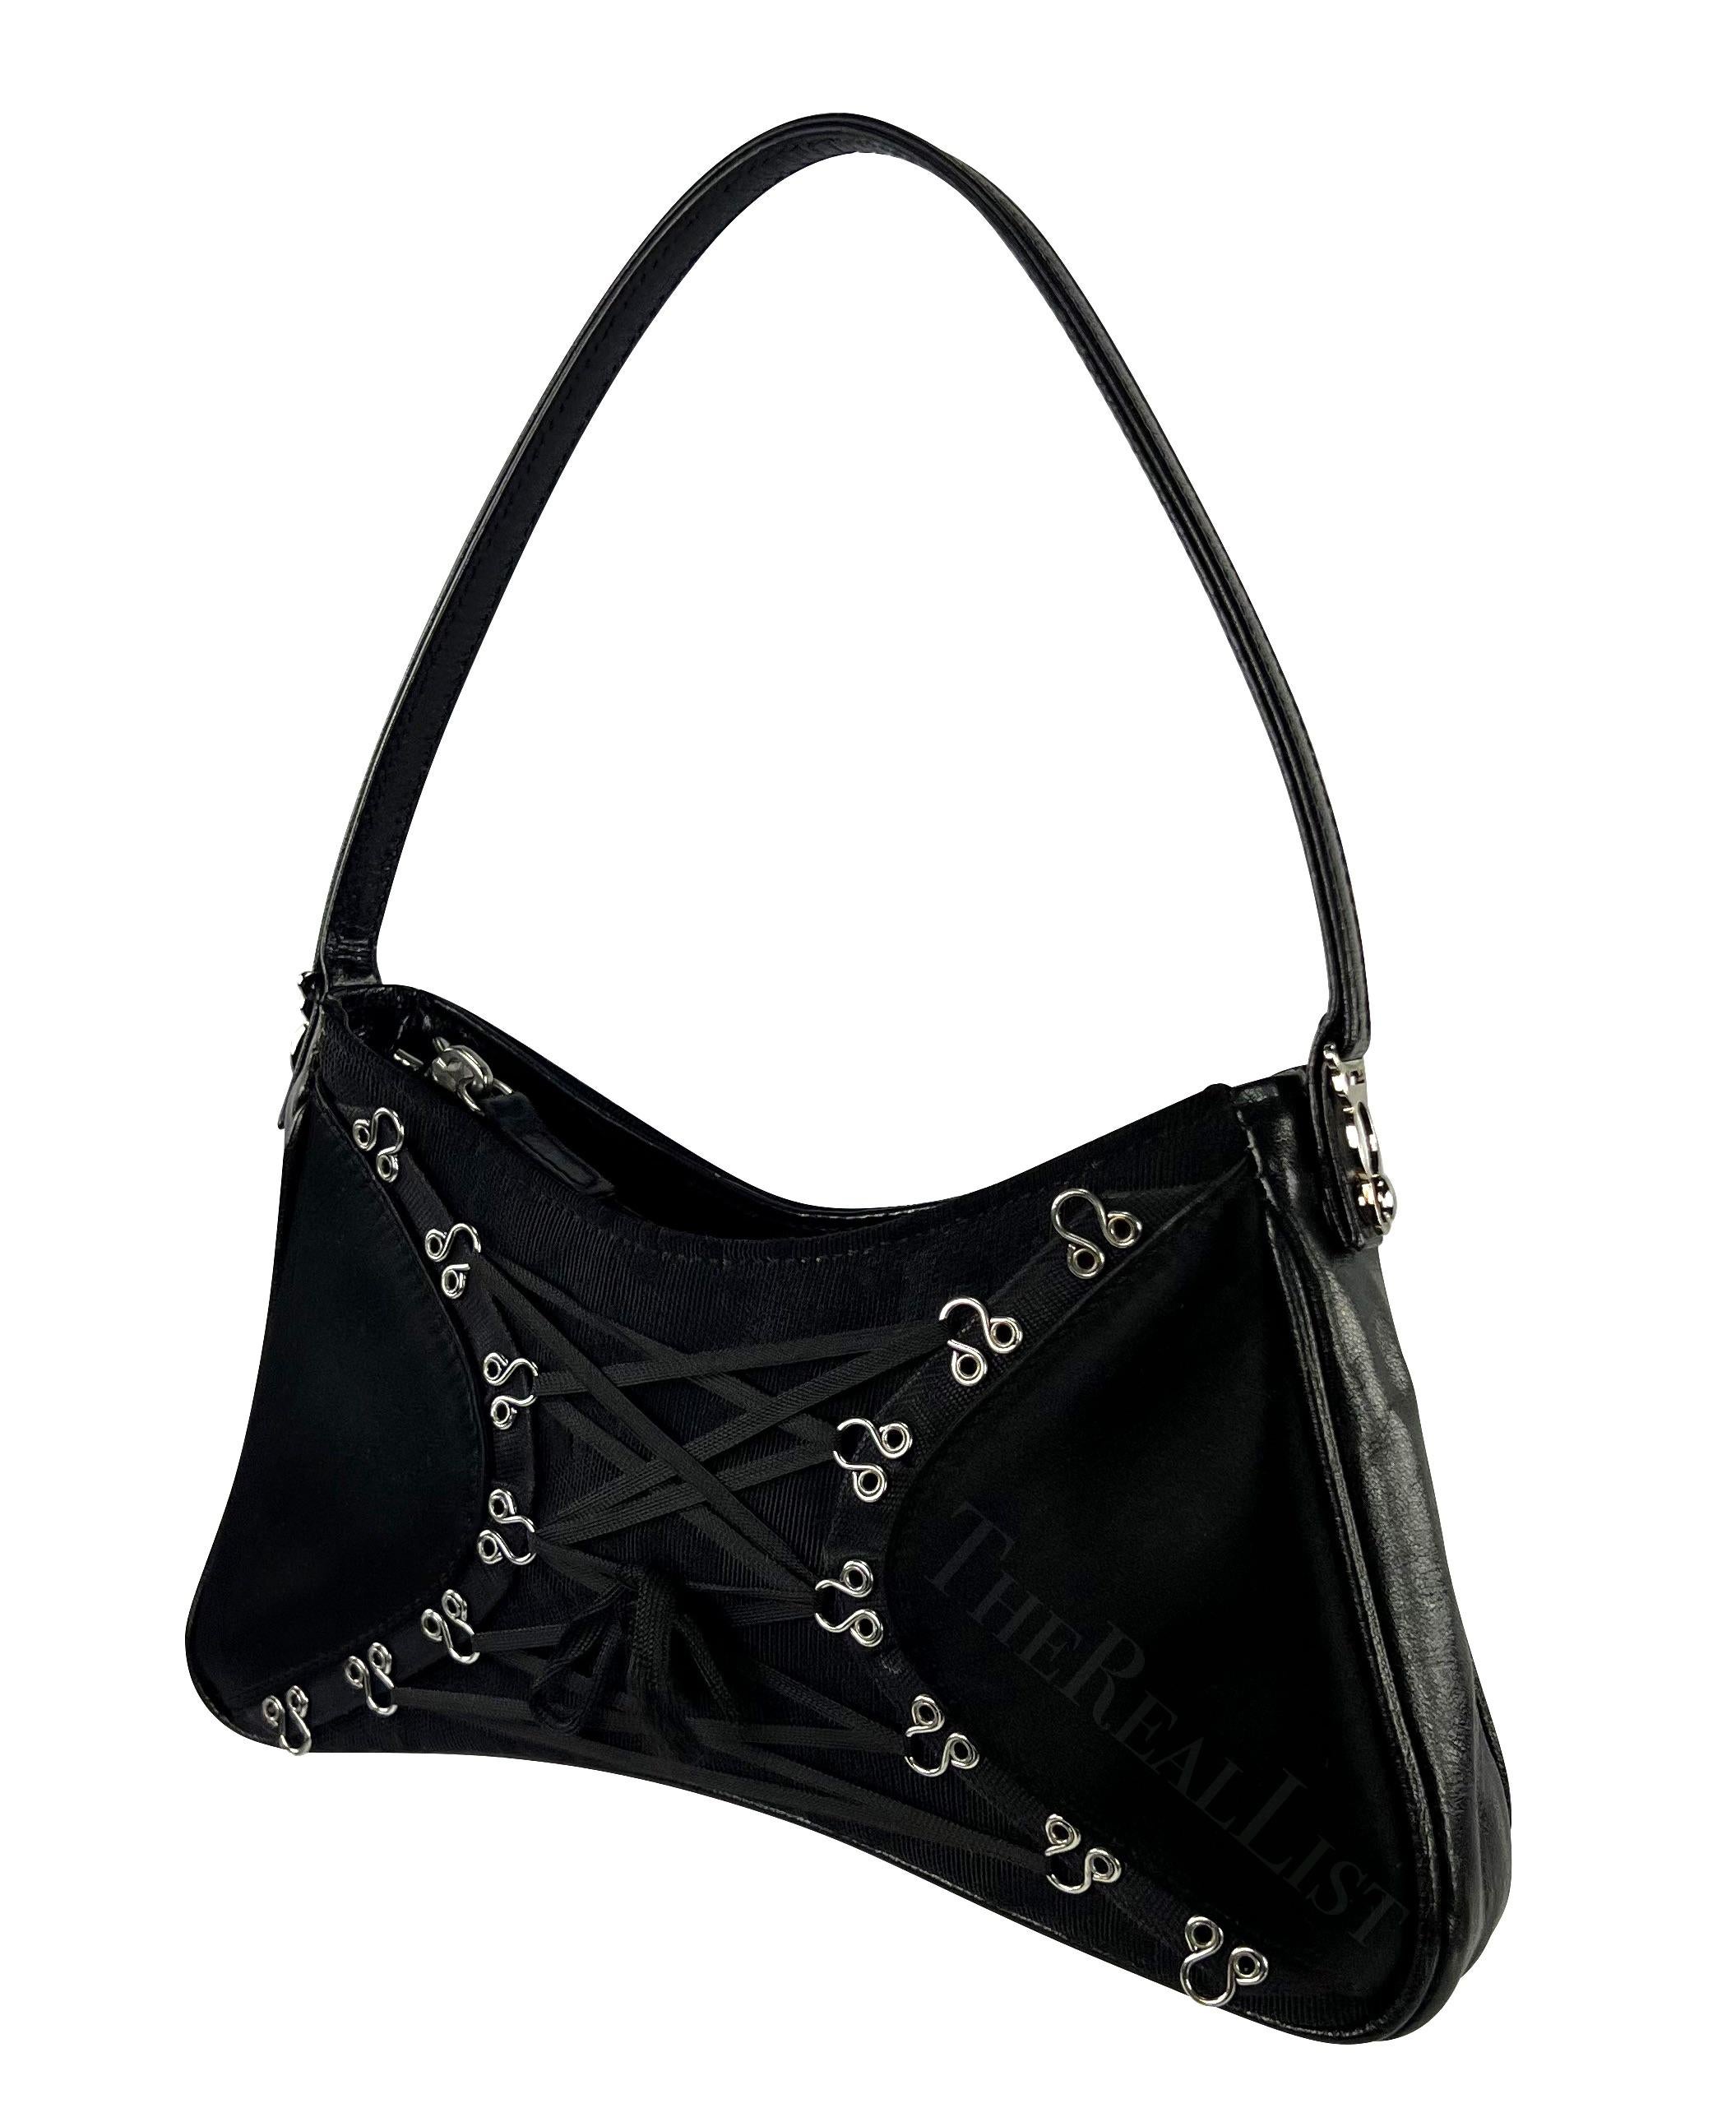 Presenting a stunning black satin John Galliano lace mini bag. A timeless piece from the early 2000s. This exquisite creation features a sleek black satin body adorned with luxurious black leather finishes. The silver-tone hardware, eyelets, and